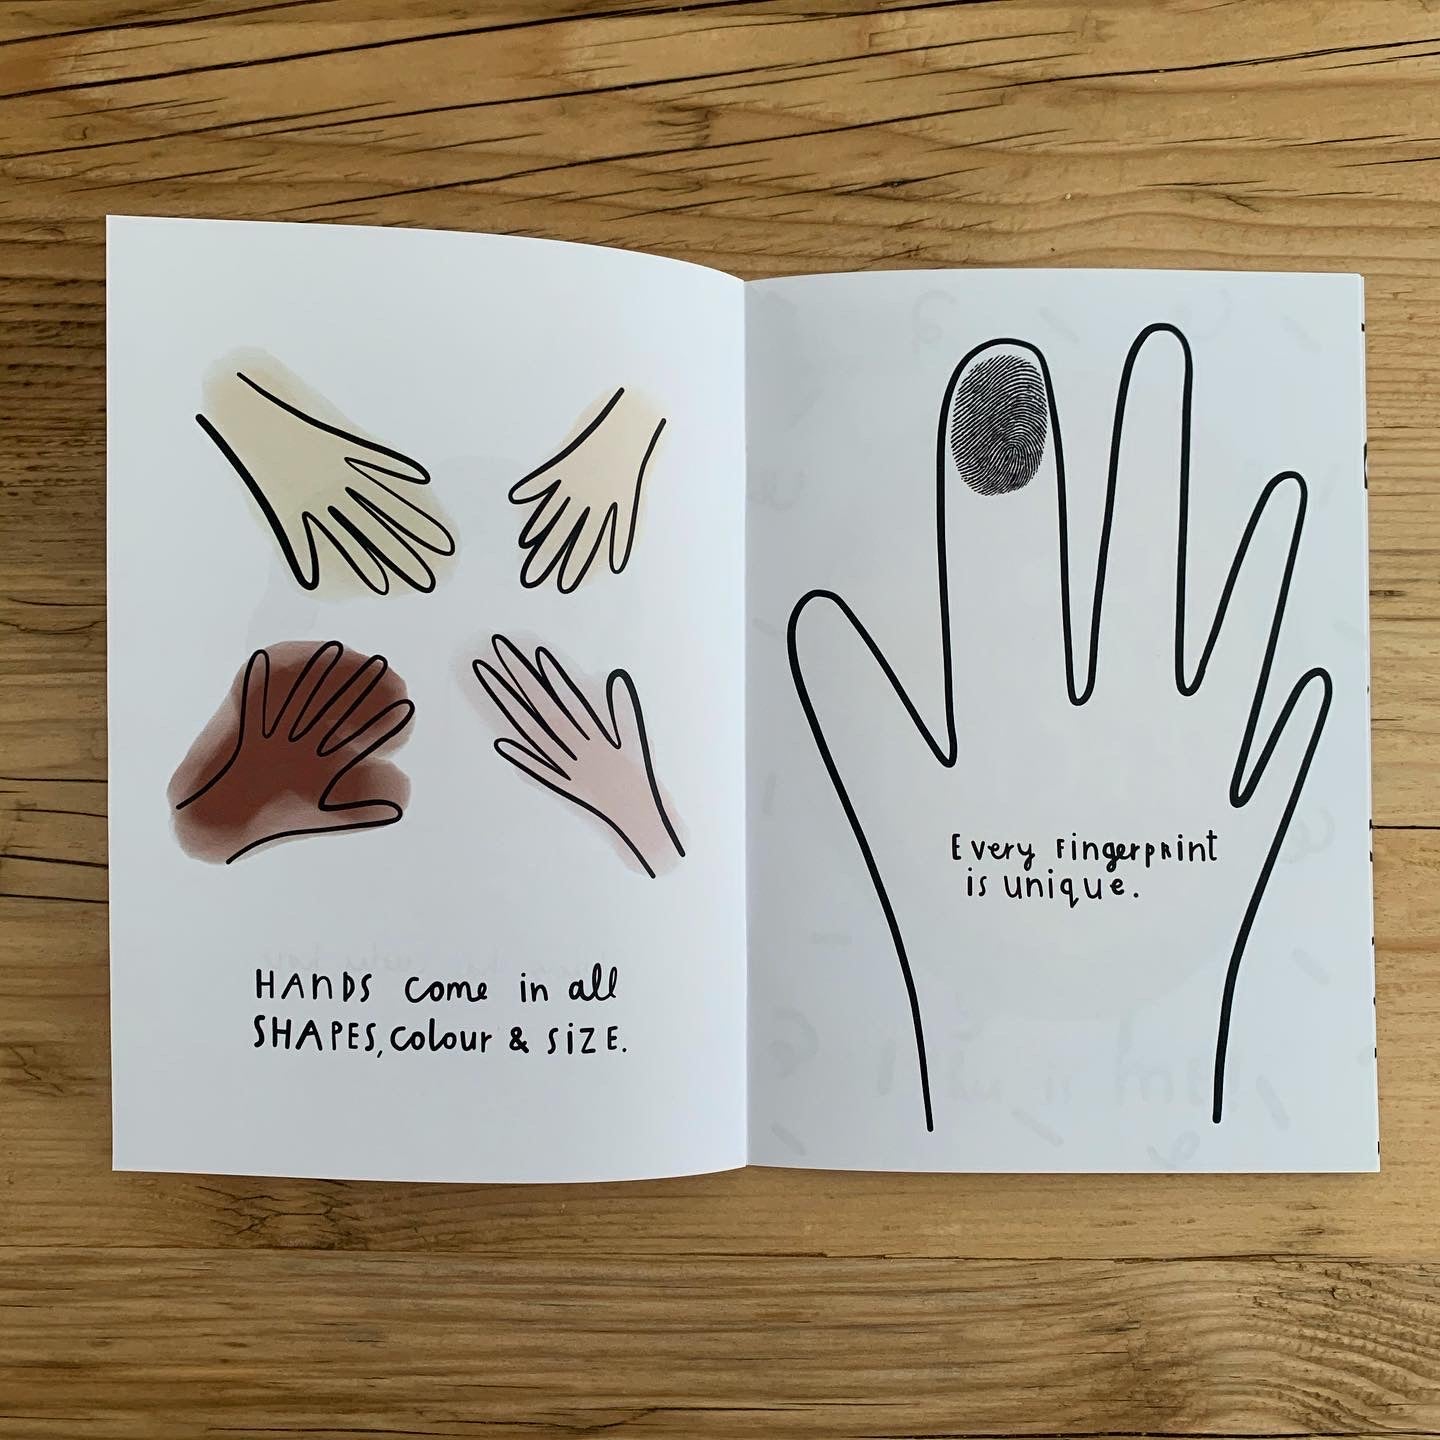 Everyone is Different - A little book with a BIG message - Illustrated and published by Rachel Gale